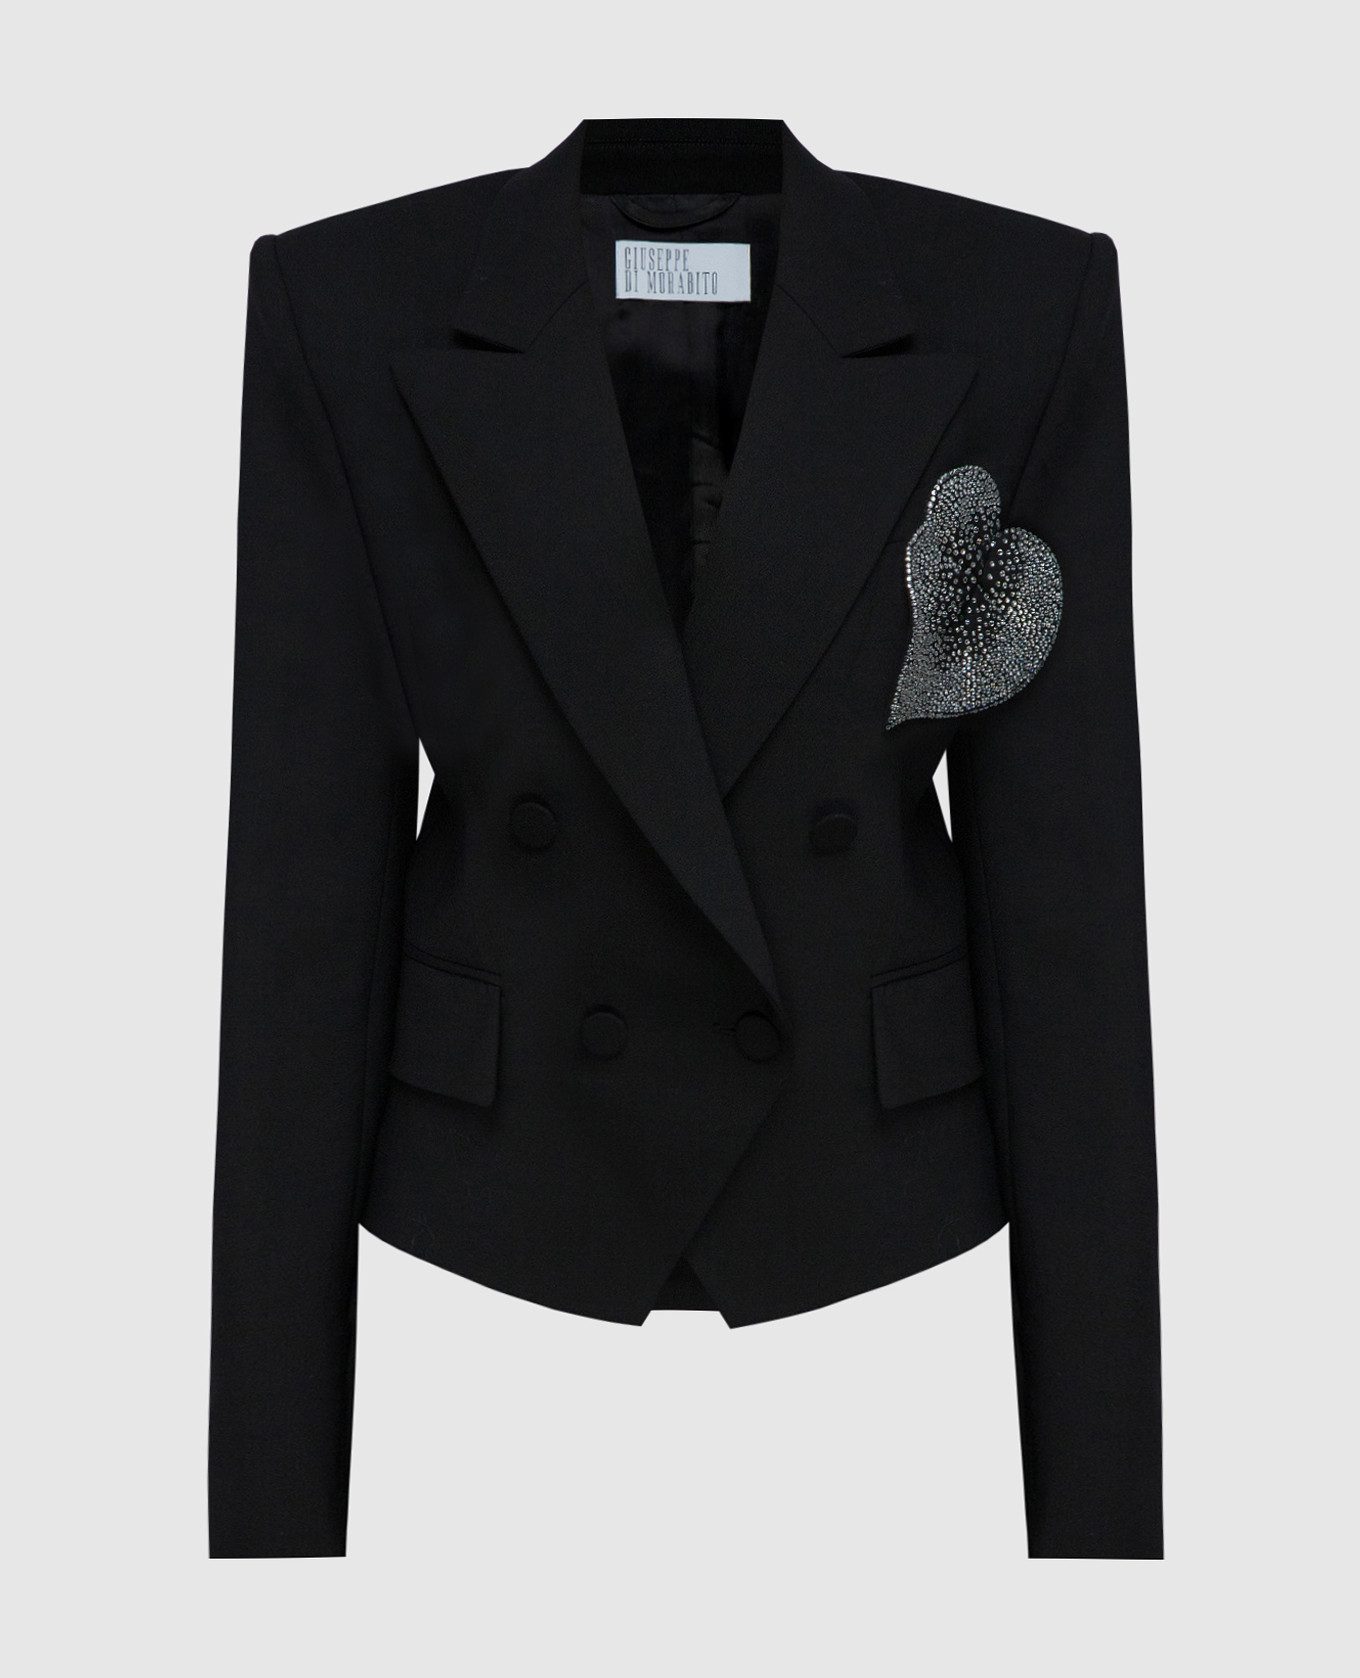 Black double-breasted wool jacket with crystal appliqué